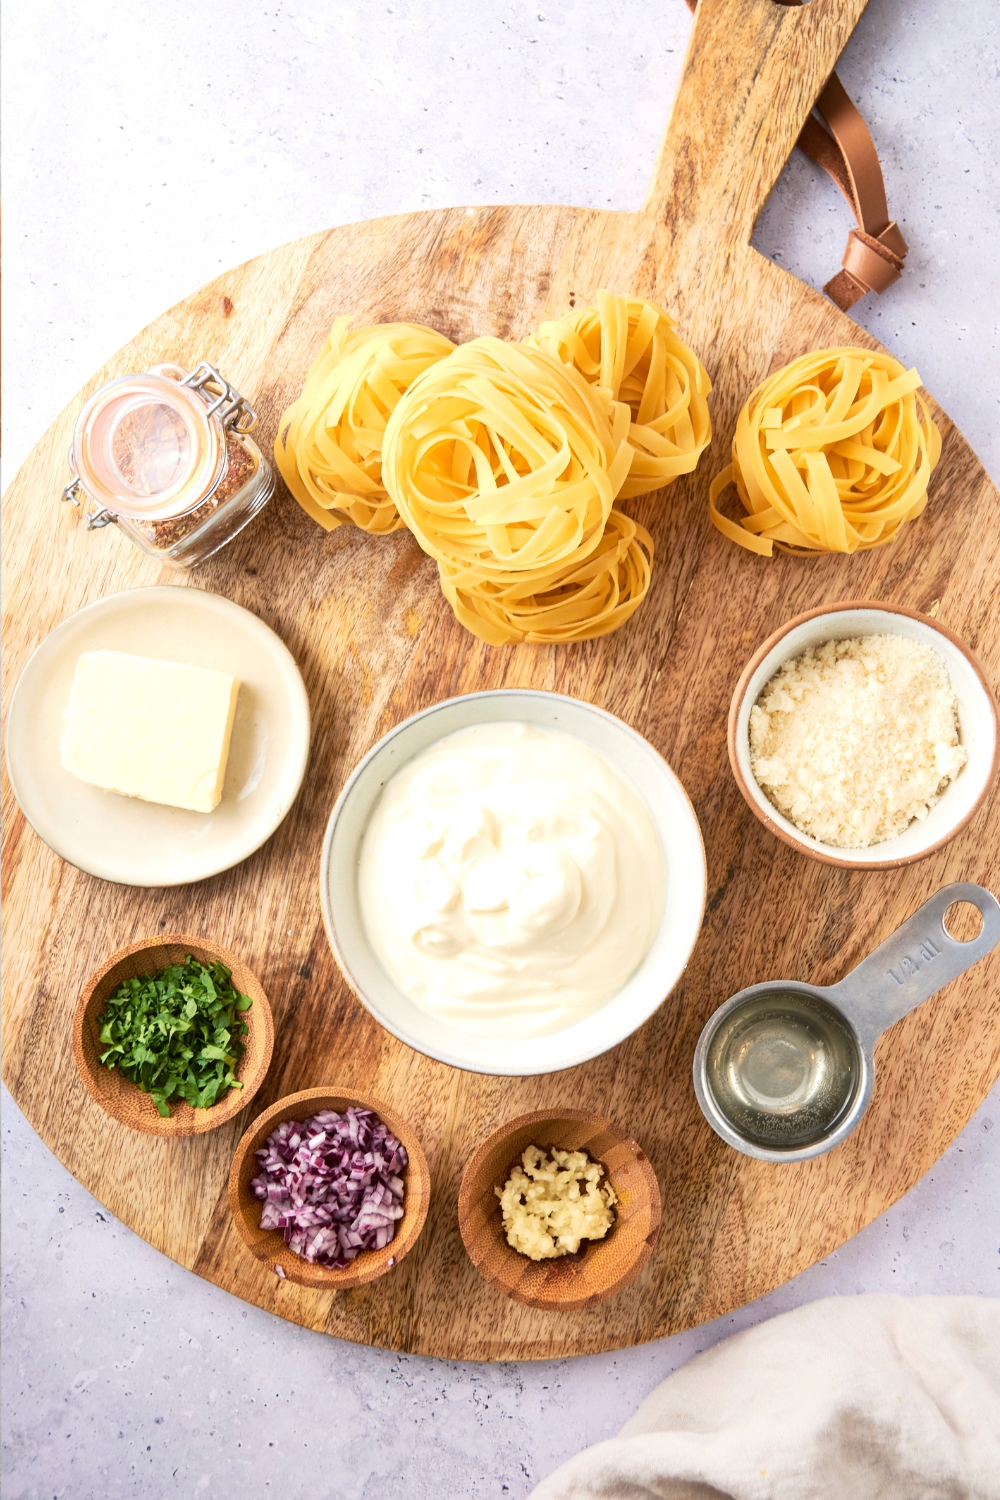 Fettuccine, parmesan cheese, butter, parsley, shallots, garlic, white wine, and oil are all in separate bowls on a wooden cutting board.